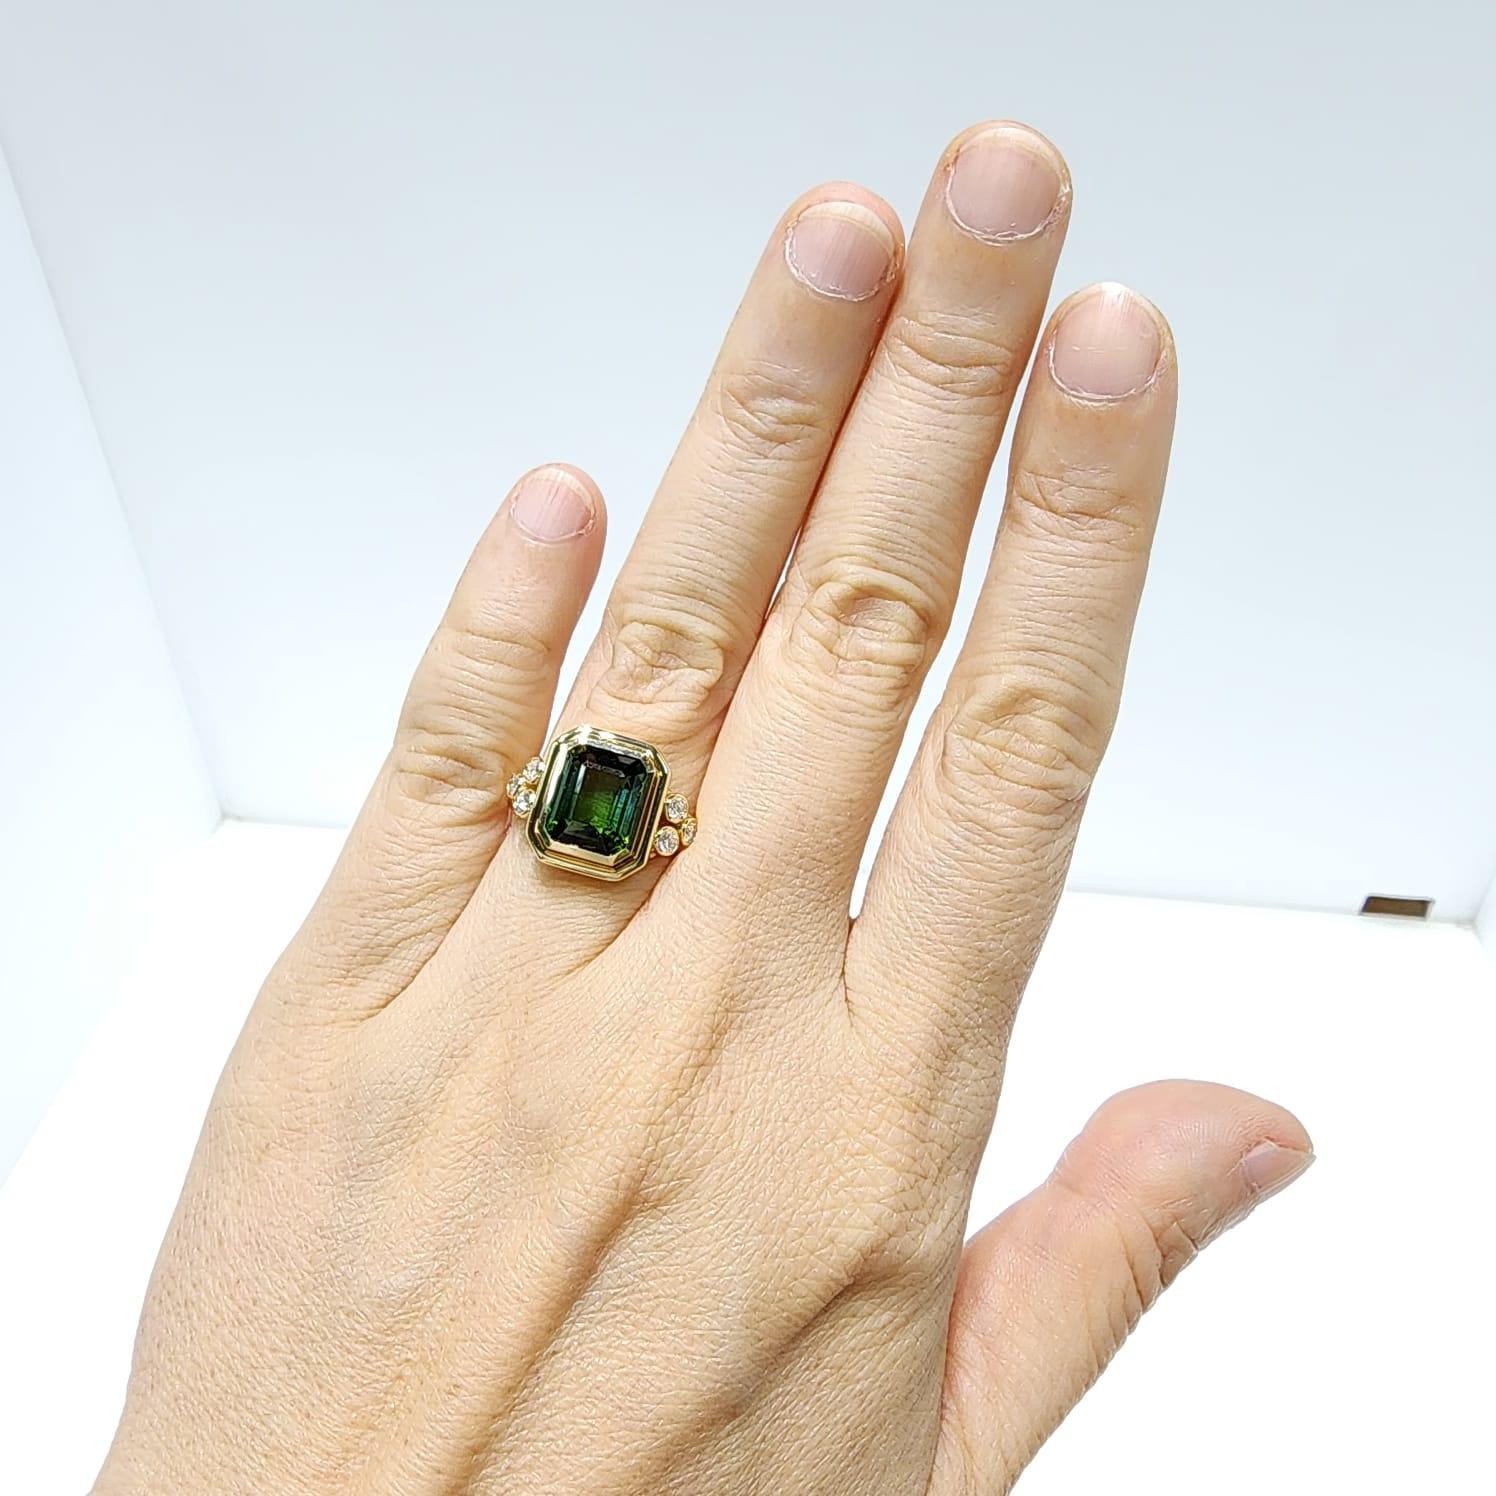 Emerald Cut 3.72 Carat Green Tourmaline Cocktail Ring in 18K Yellow Gold For Sale